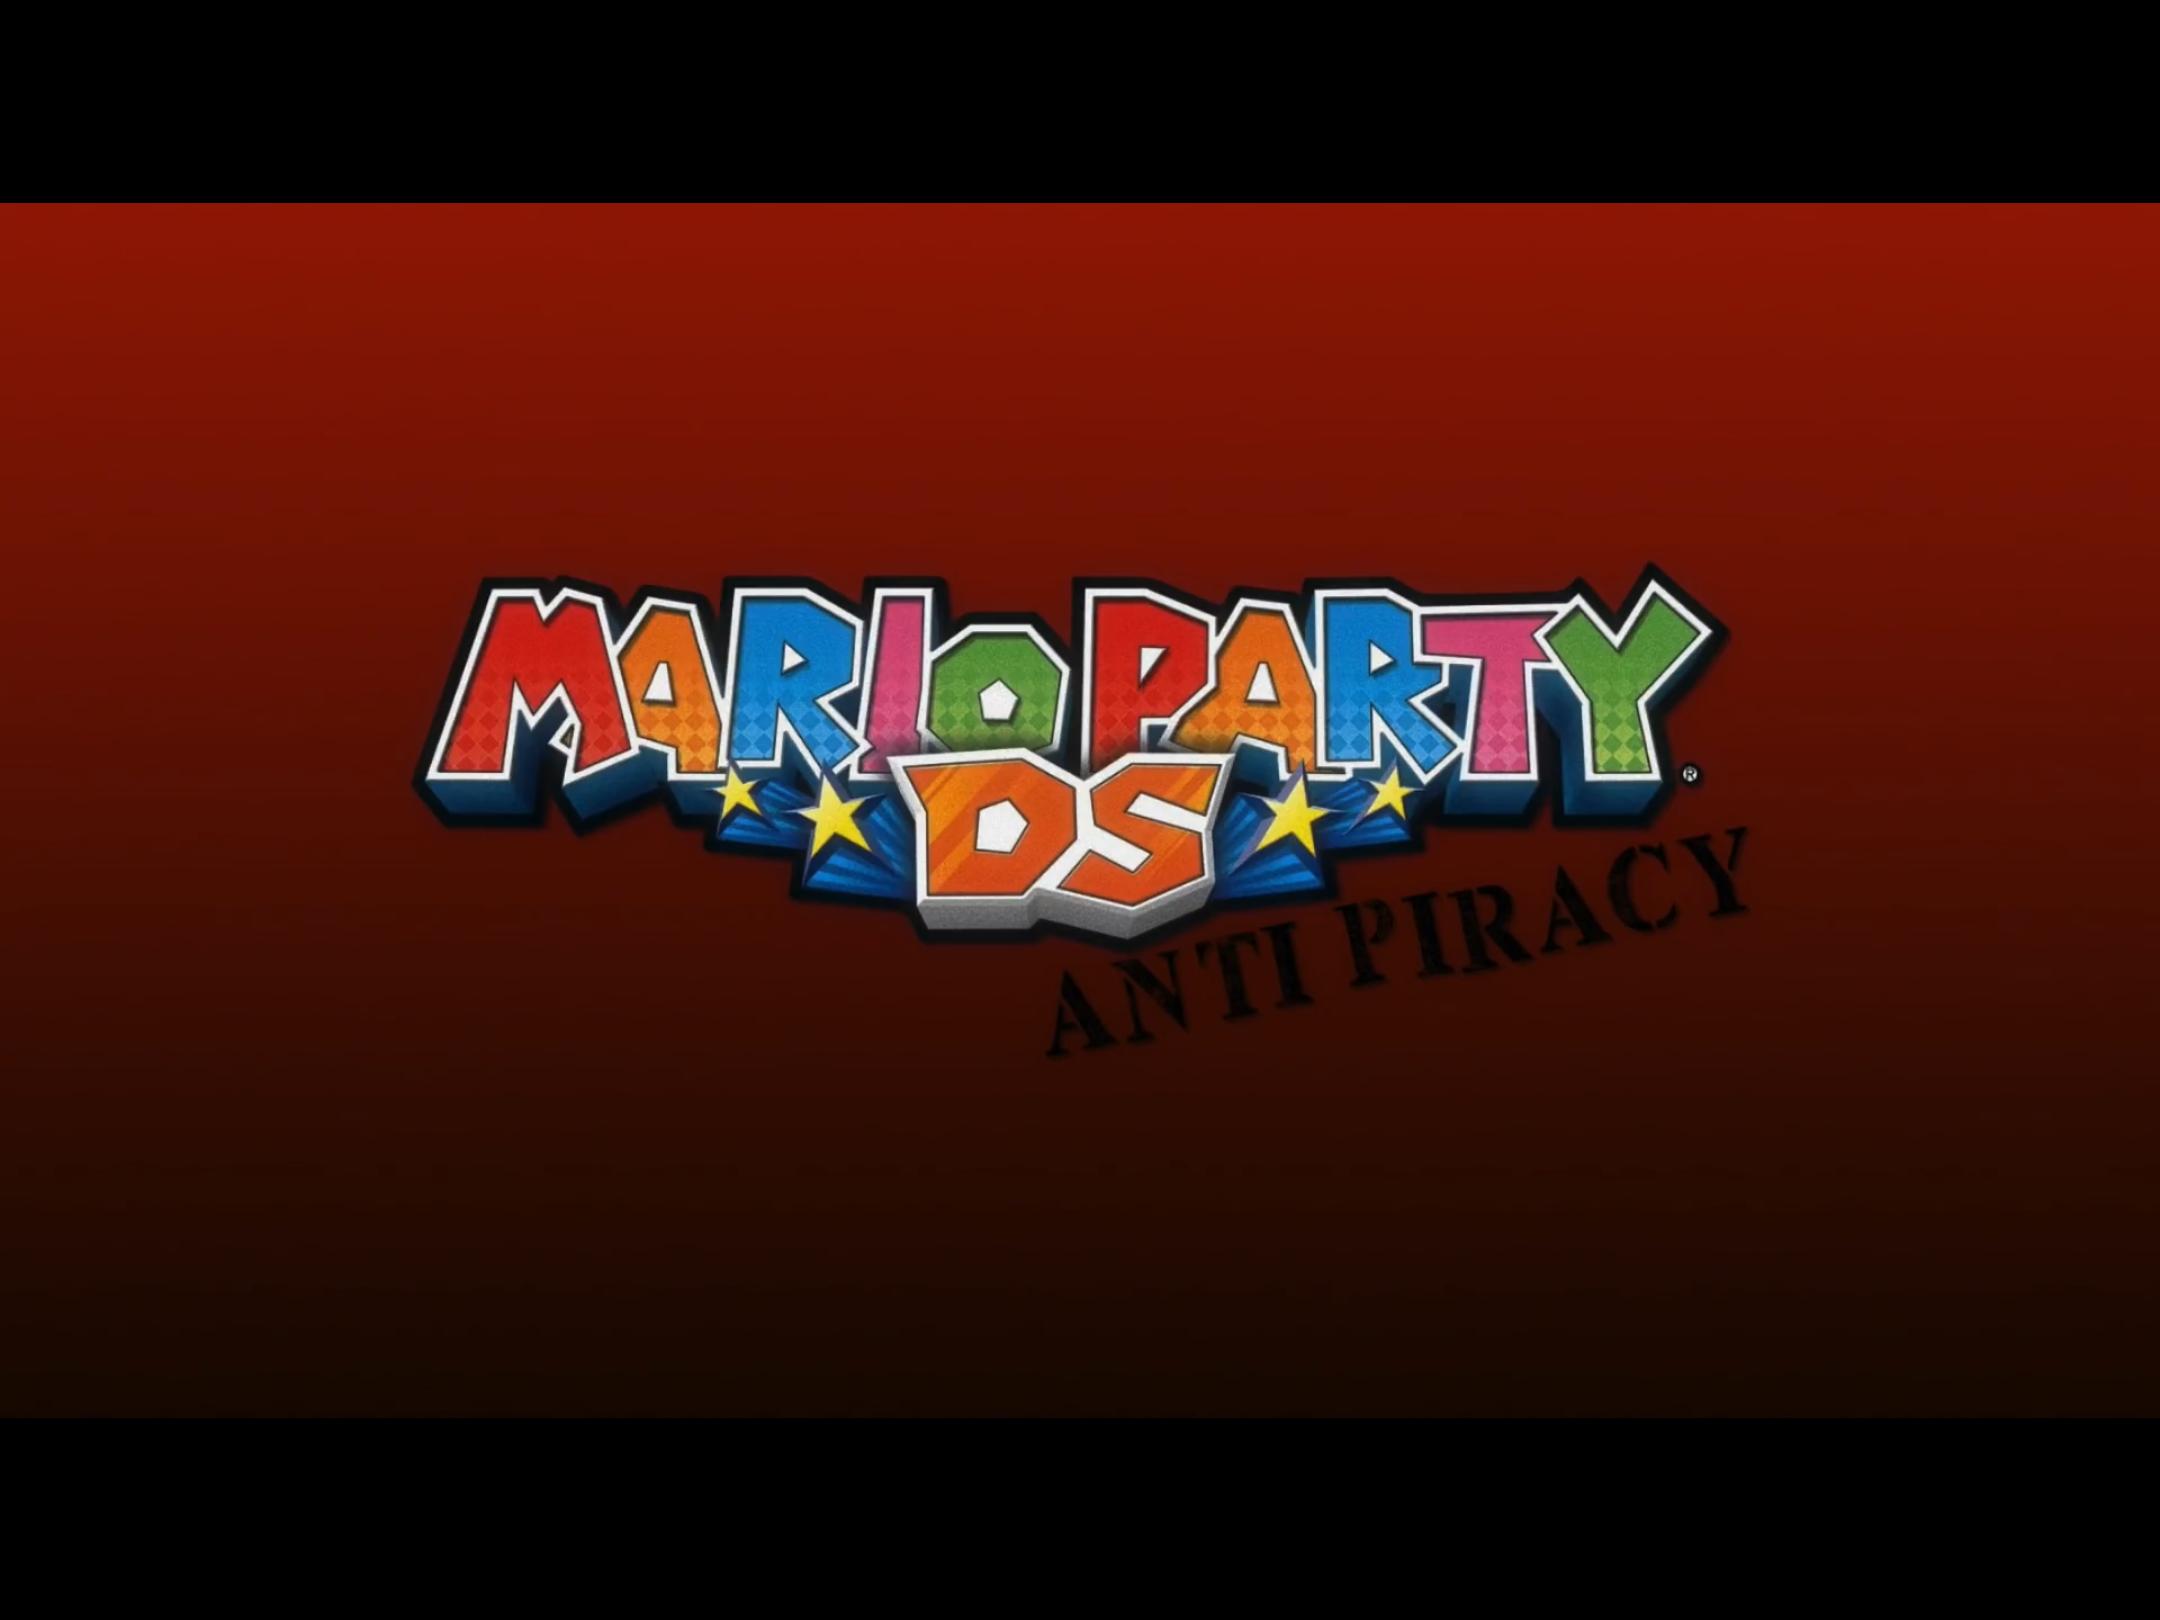 Mario Party DS: Anti-Piracy Screen